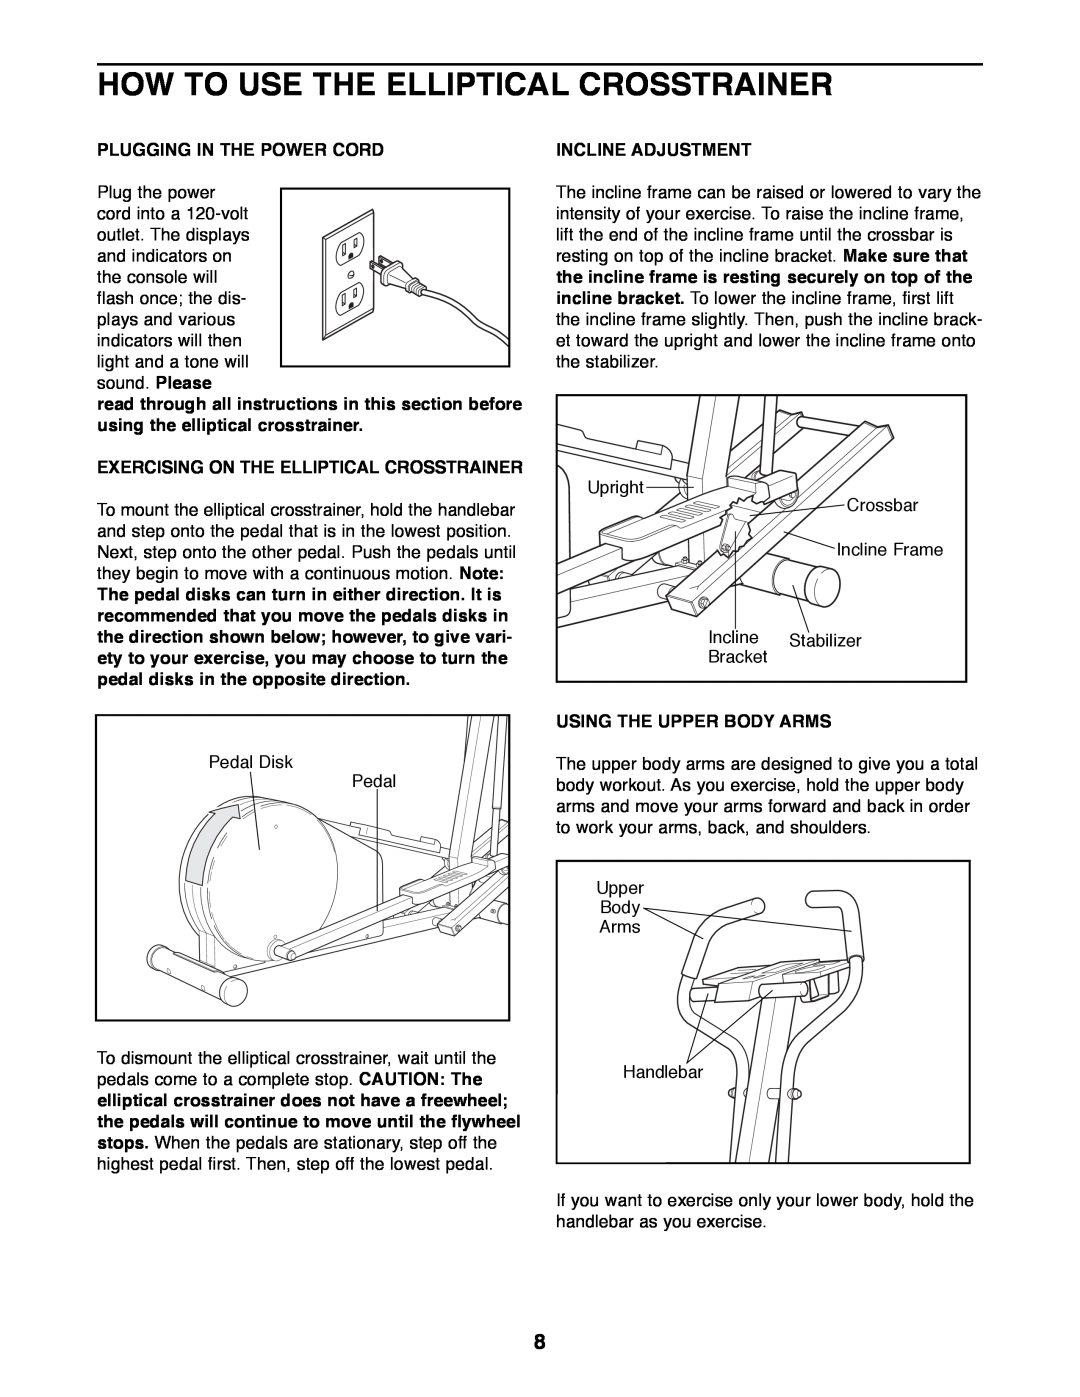 Healthrider HREL89070 manual How To Use The Elliptical Crosstrainer, Plugging In The Power Cord, Incline Adjustment 